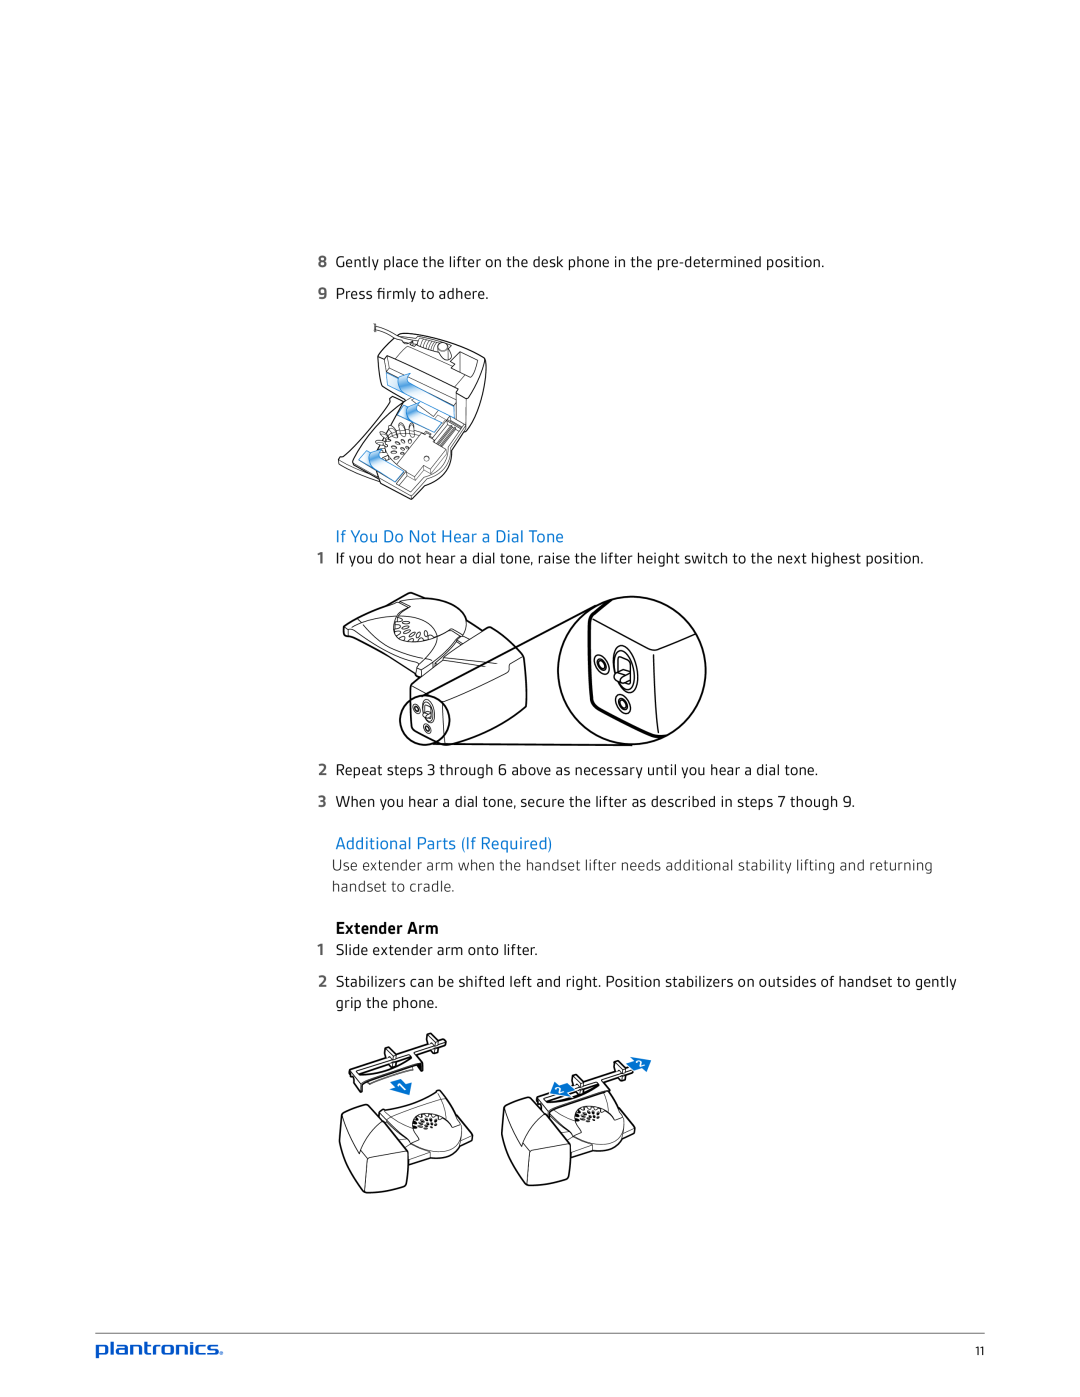 Plantronics mda200 manual If You Do Not Hear a Dial Tone, Additional Parts If Required, Extender Arm 